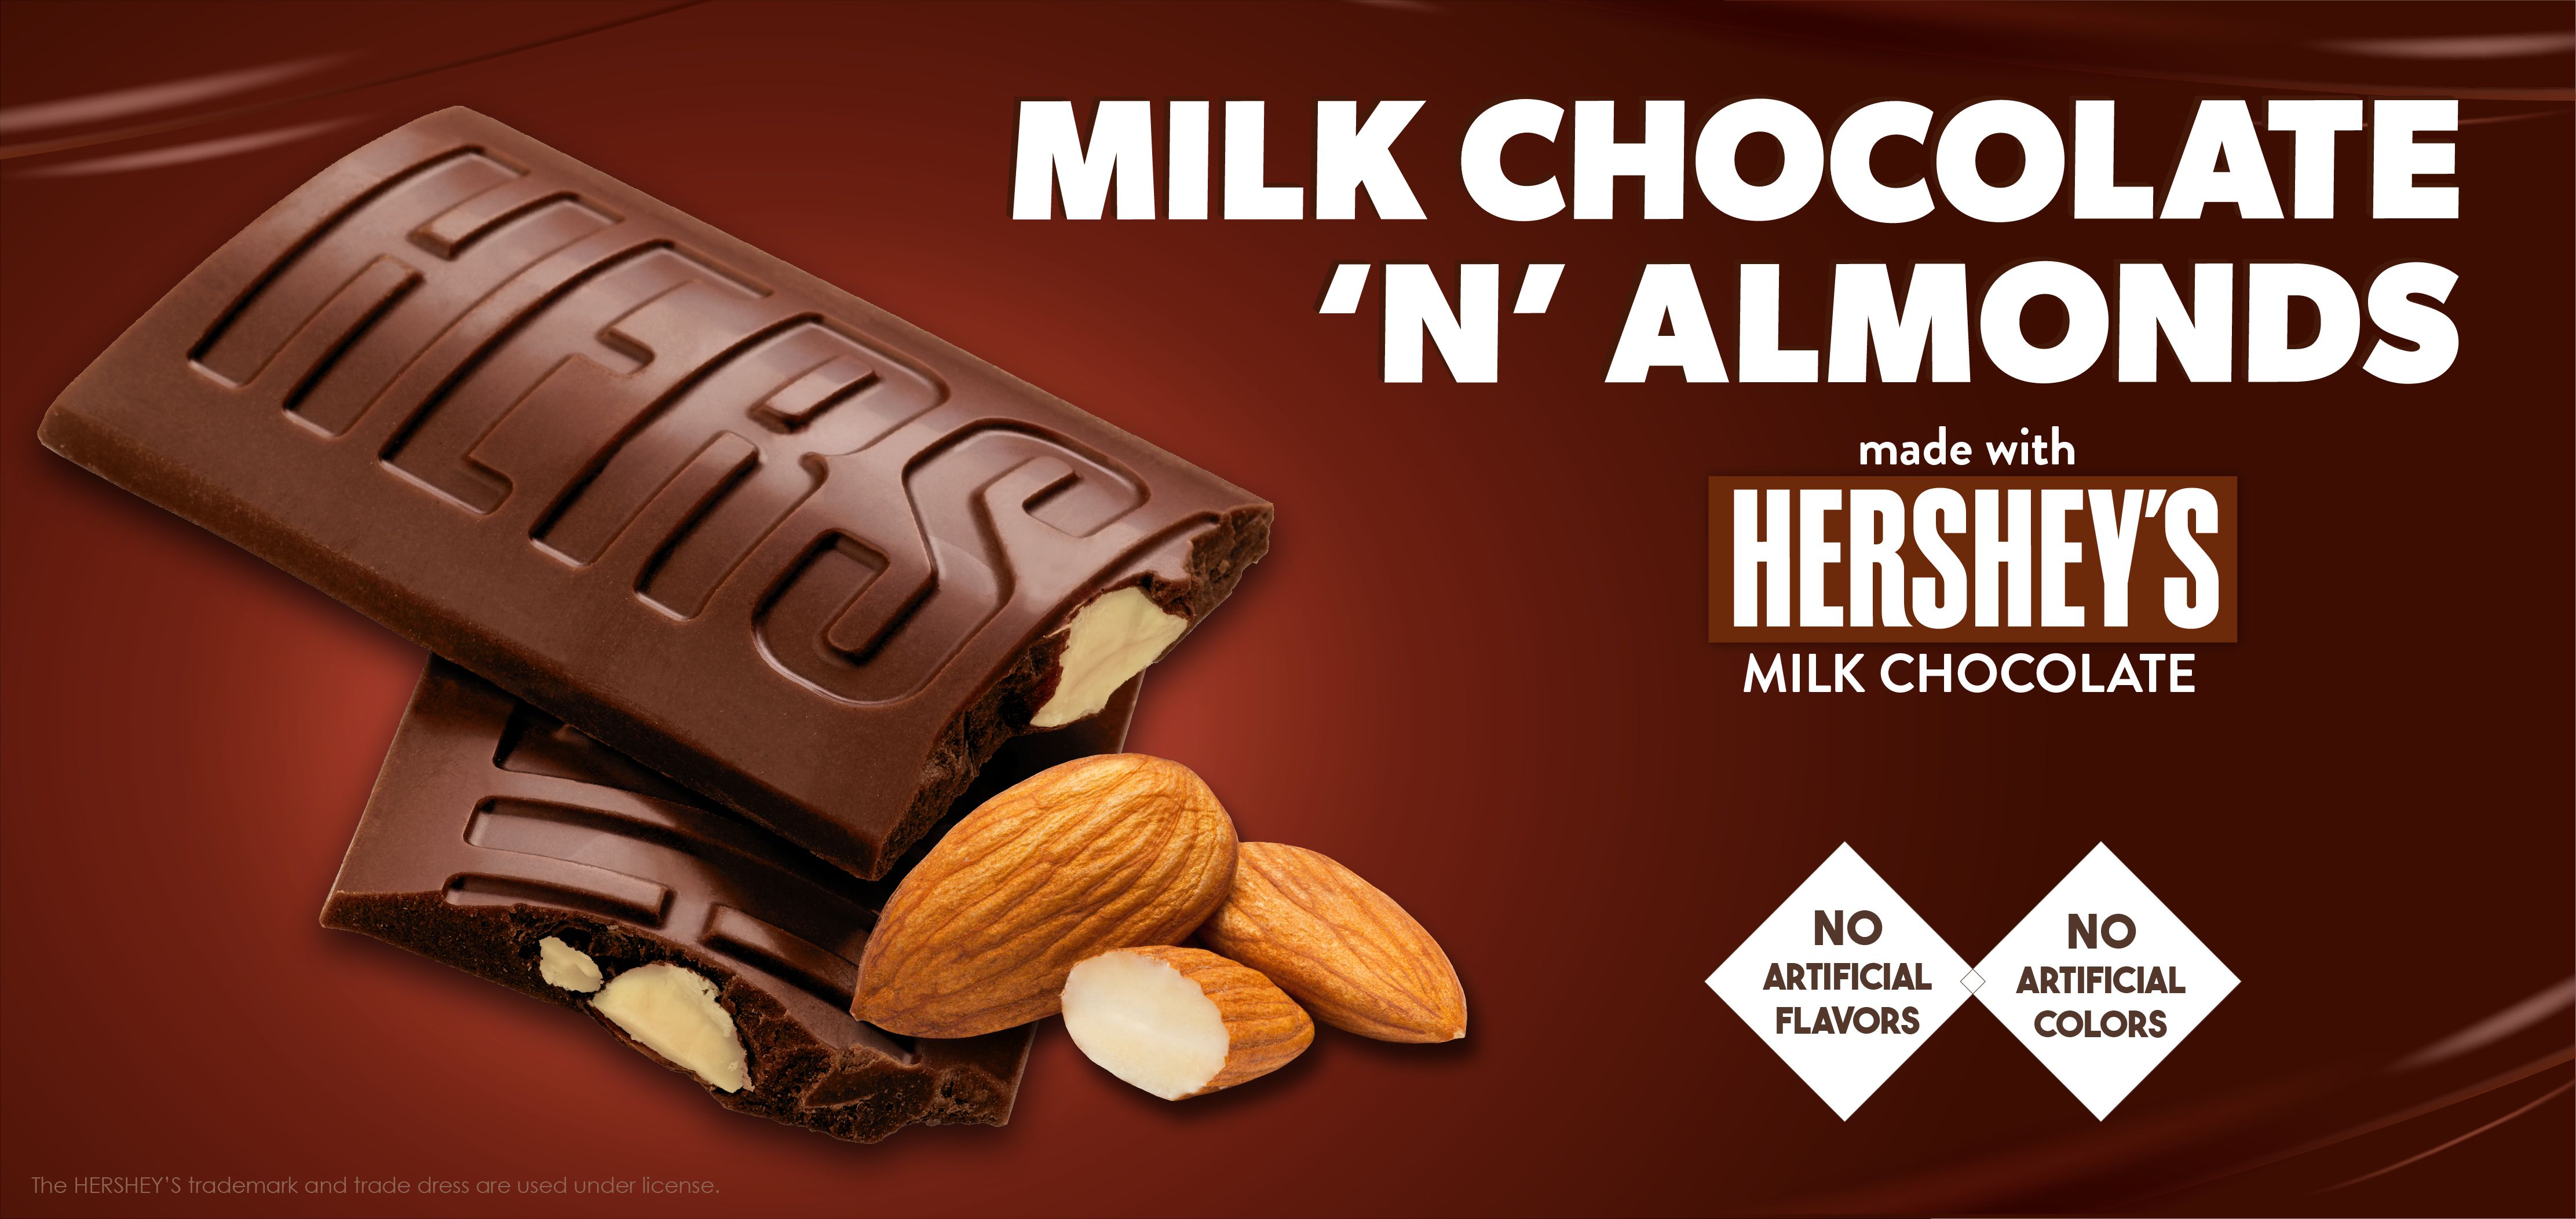 milk chocolate 'n' almonds made with hershey's® chocolate label image